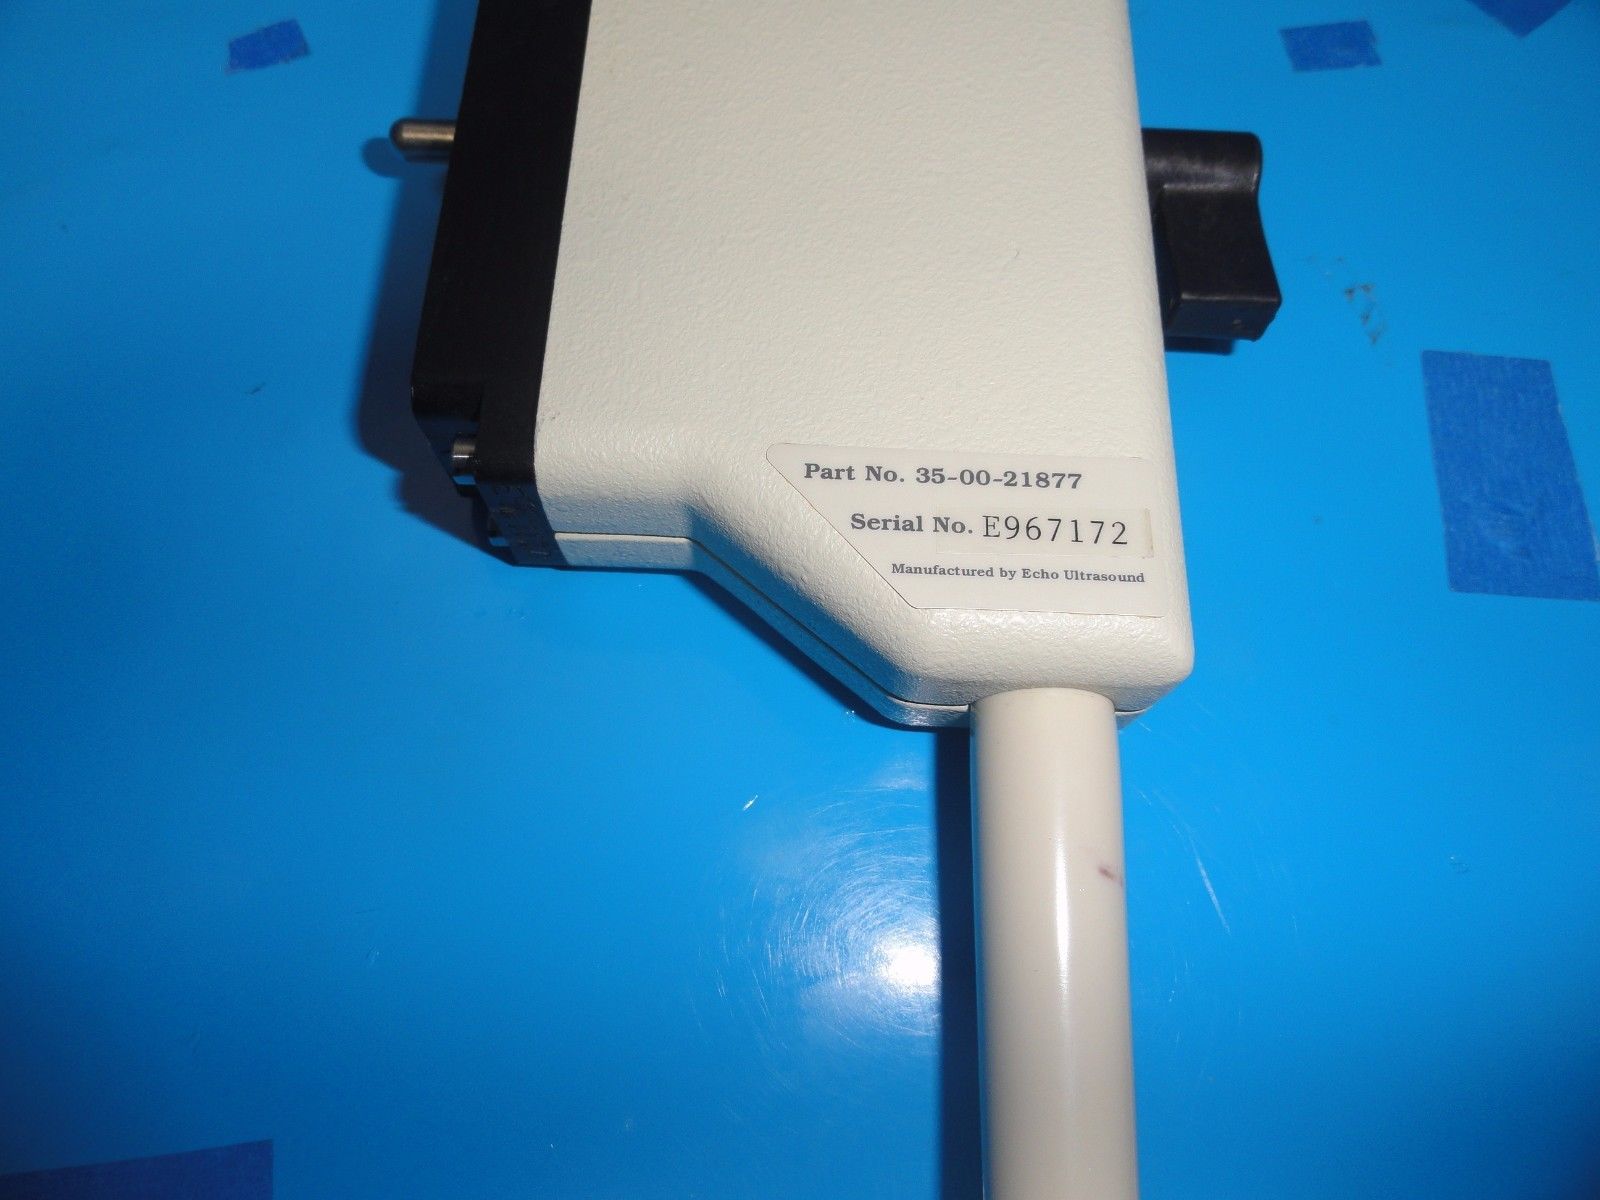 a white and black device on a blue surface